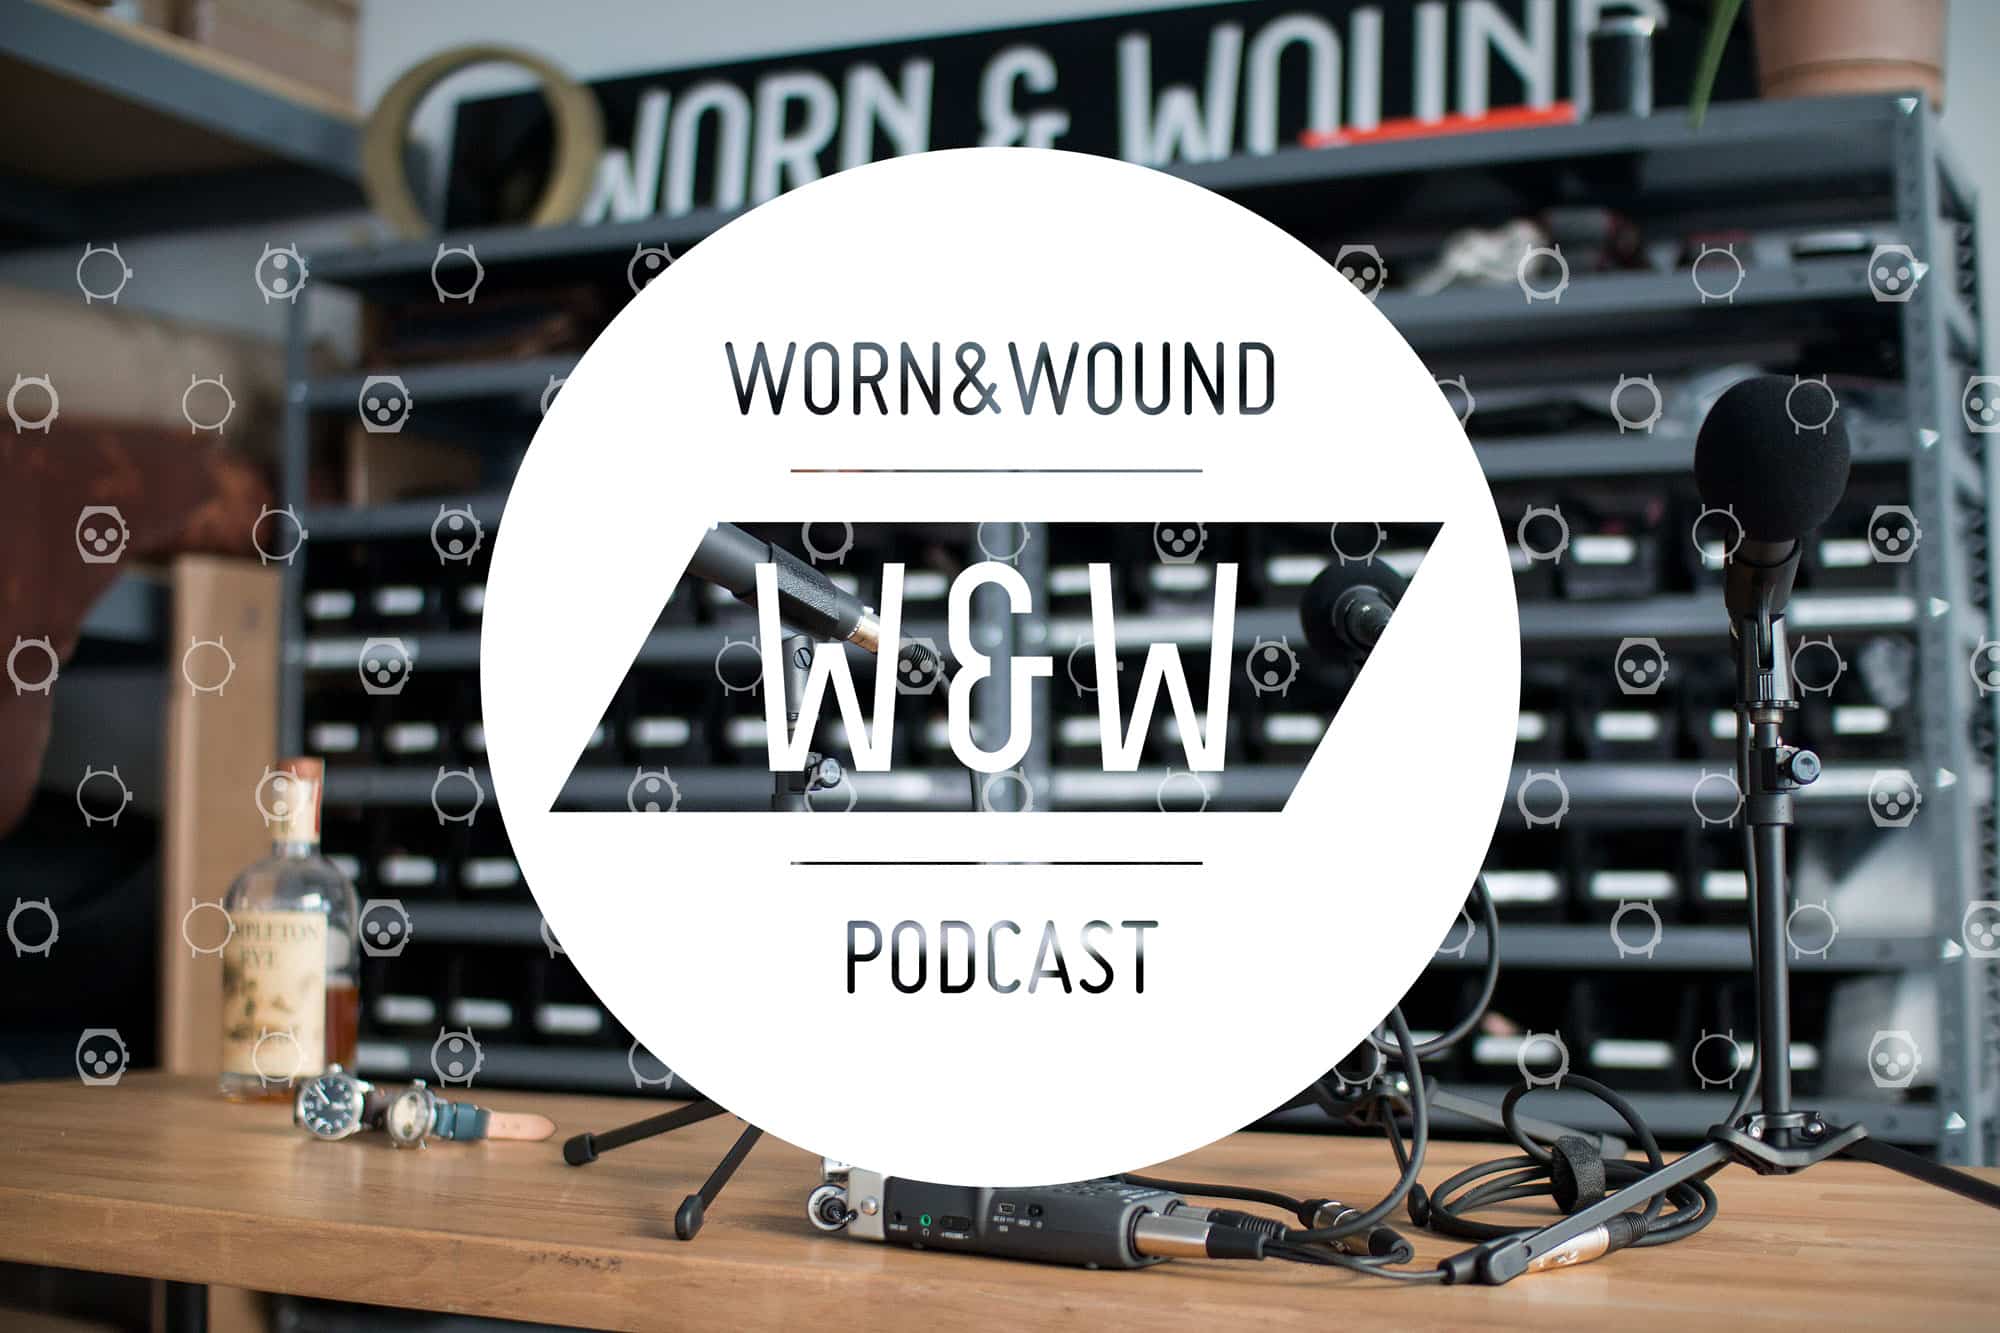 The Worn & Wound Podcast Ep. 39: Thanksgiving Break – Recommended Listening